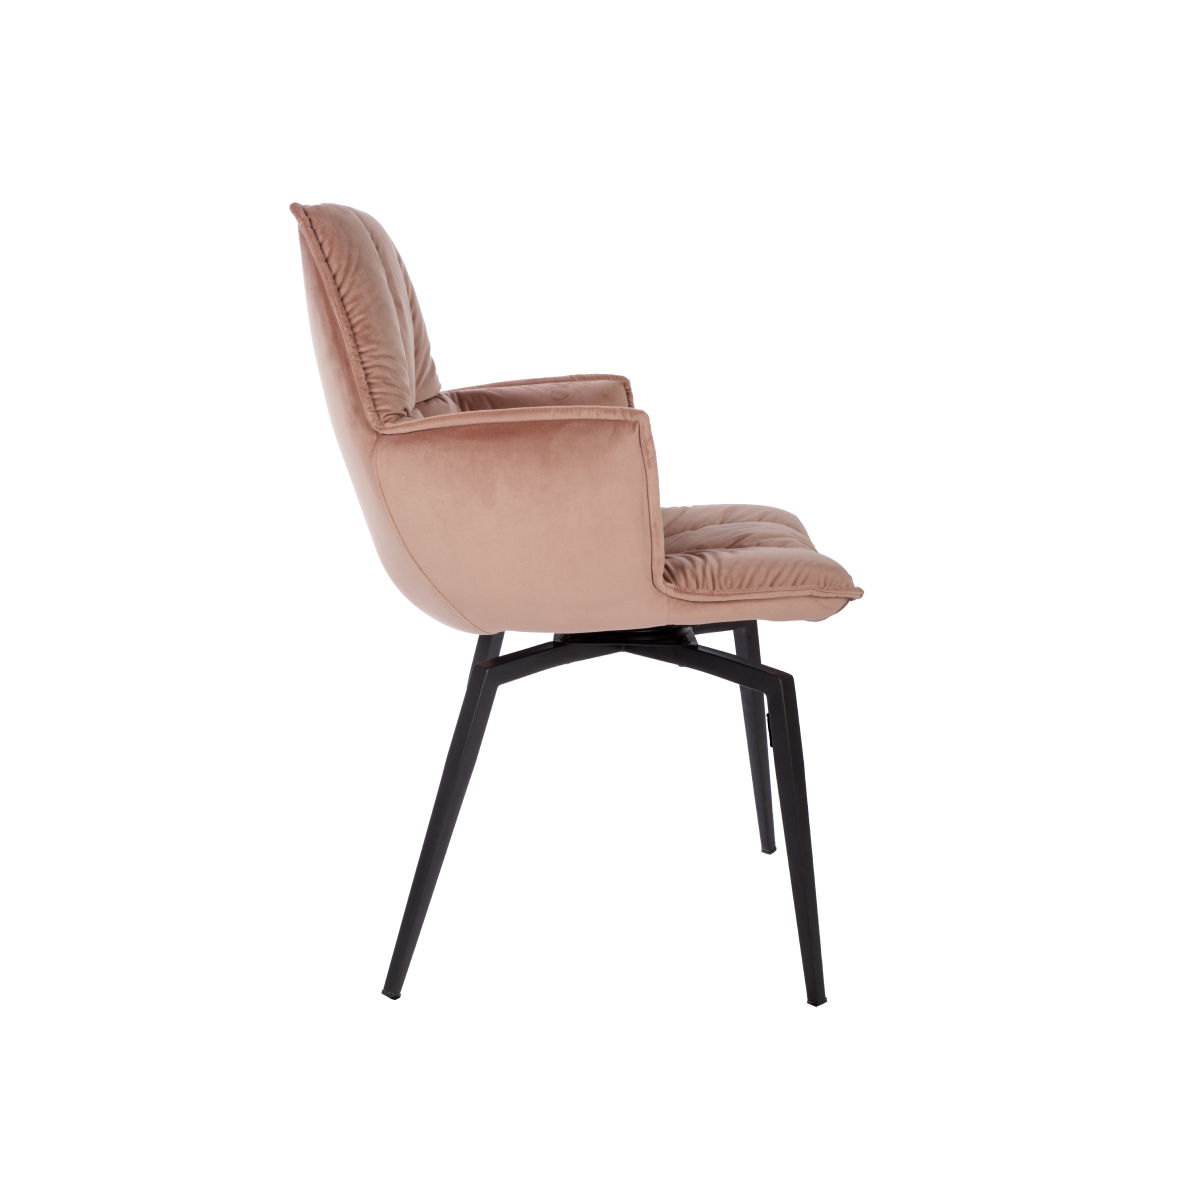 Chaise avec accoudoirs rose SIROCCO